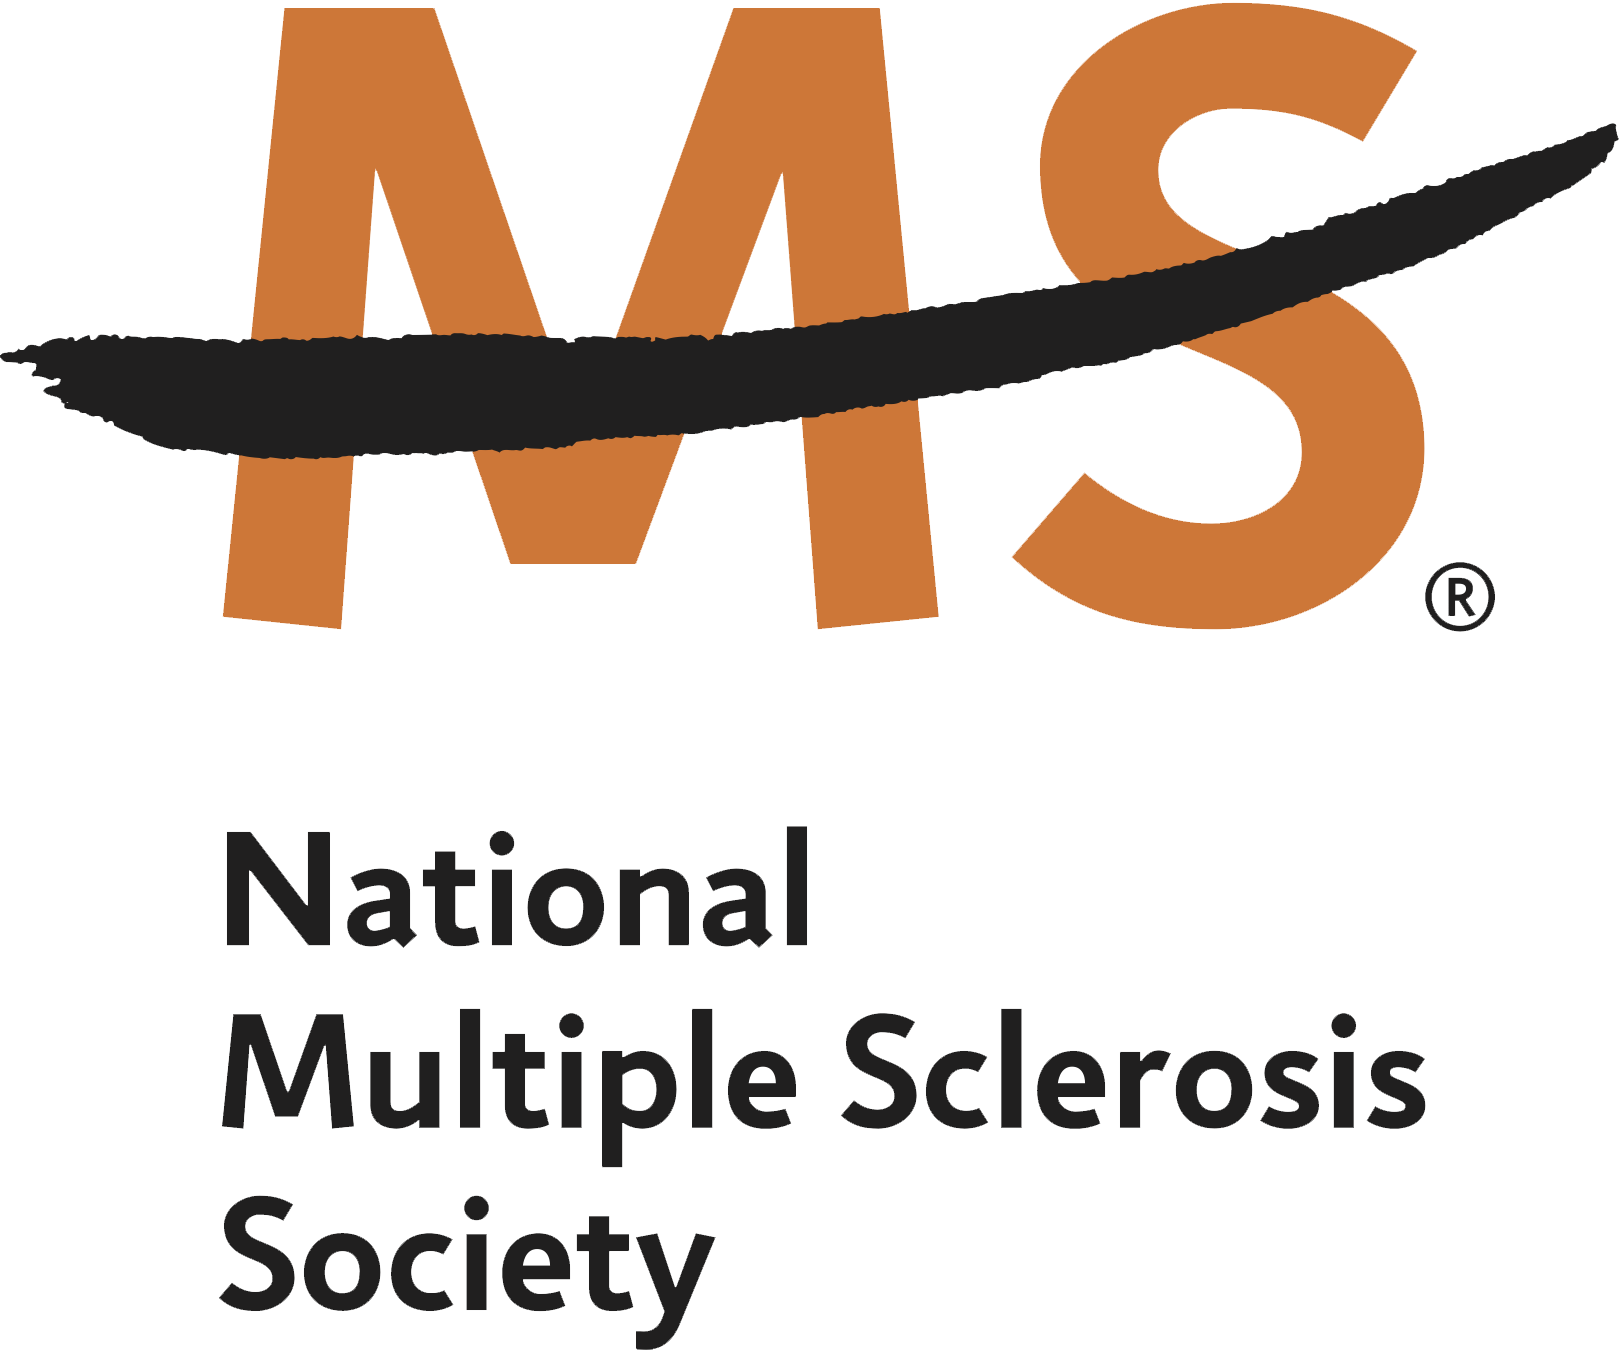 Causes - National Multiple Sclerosis Society (1620x1350)